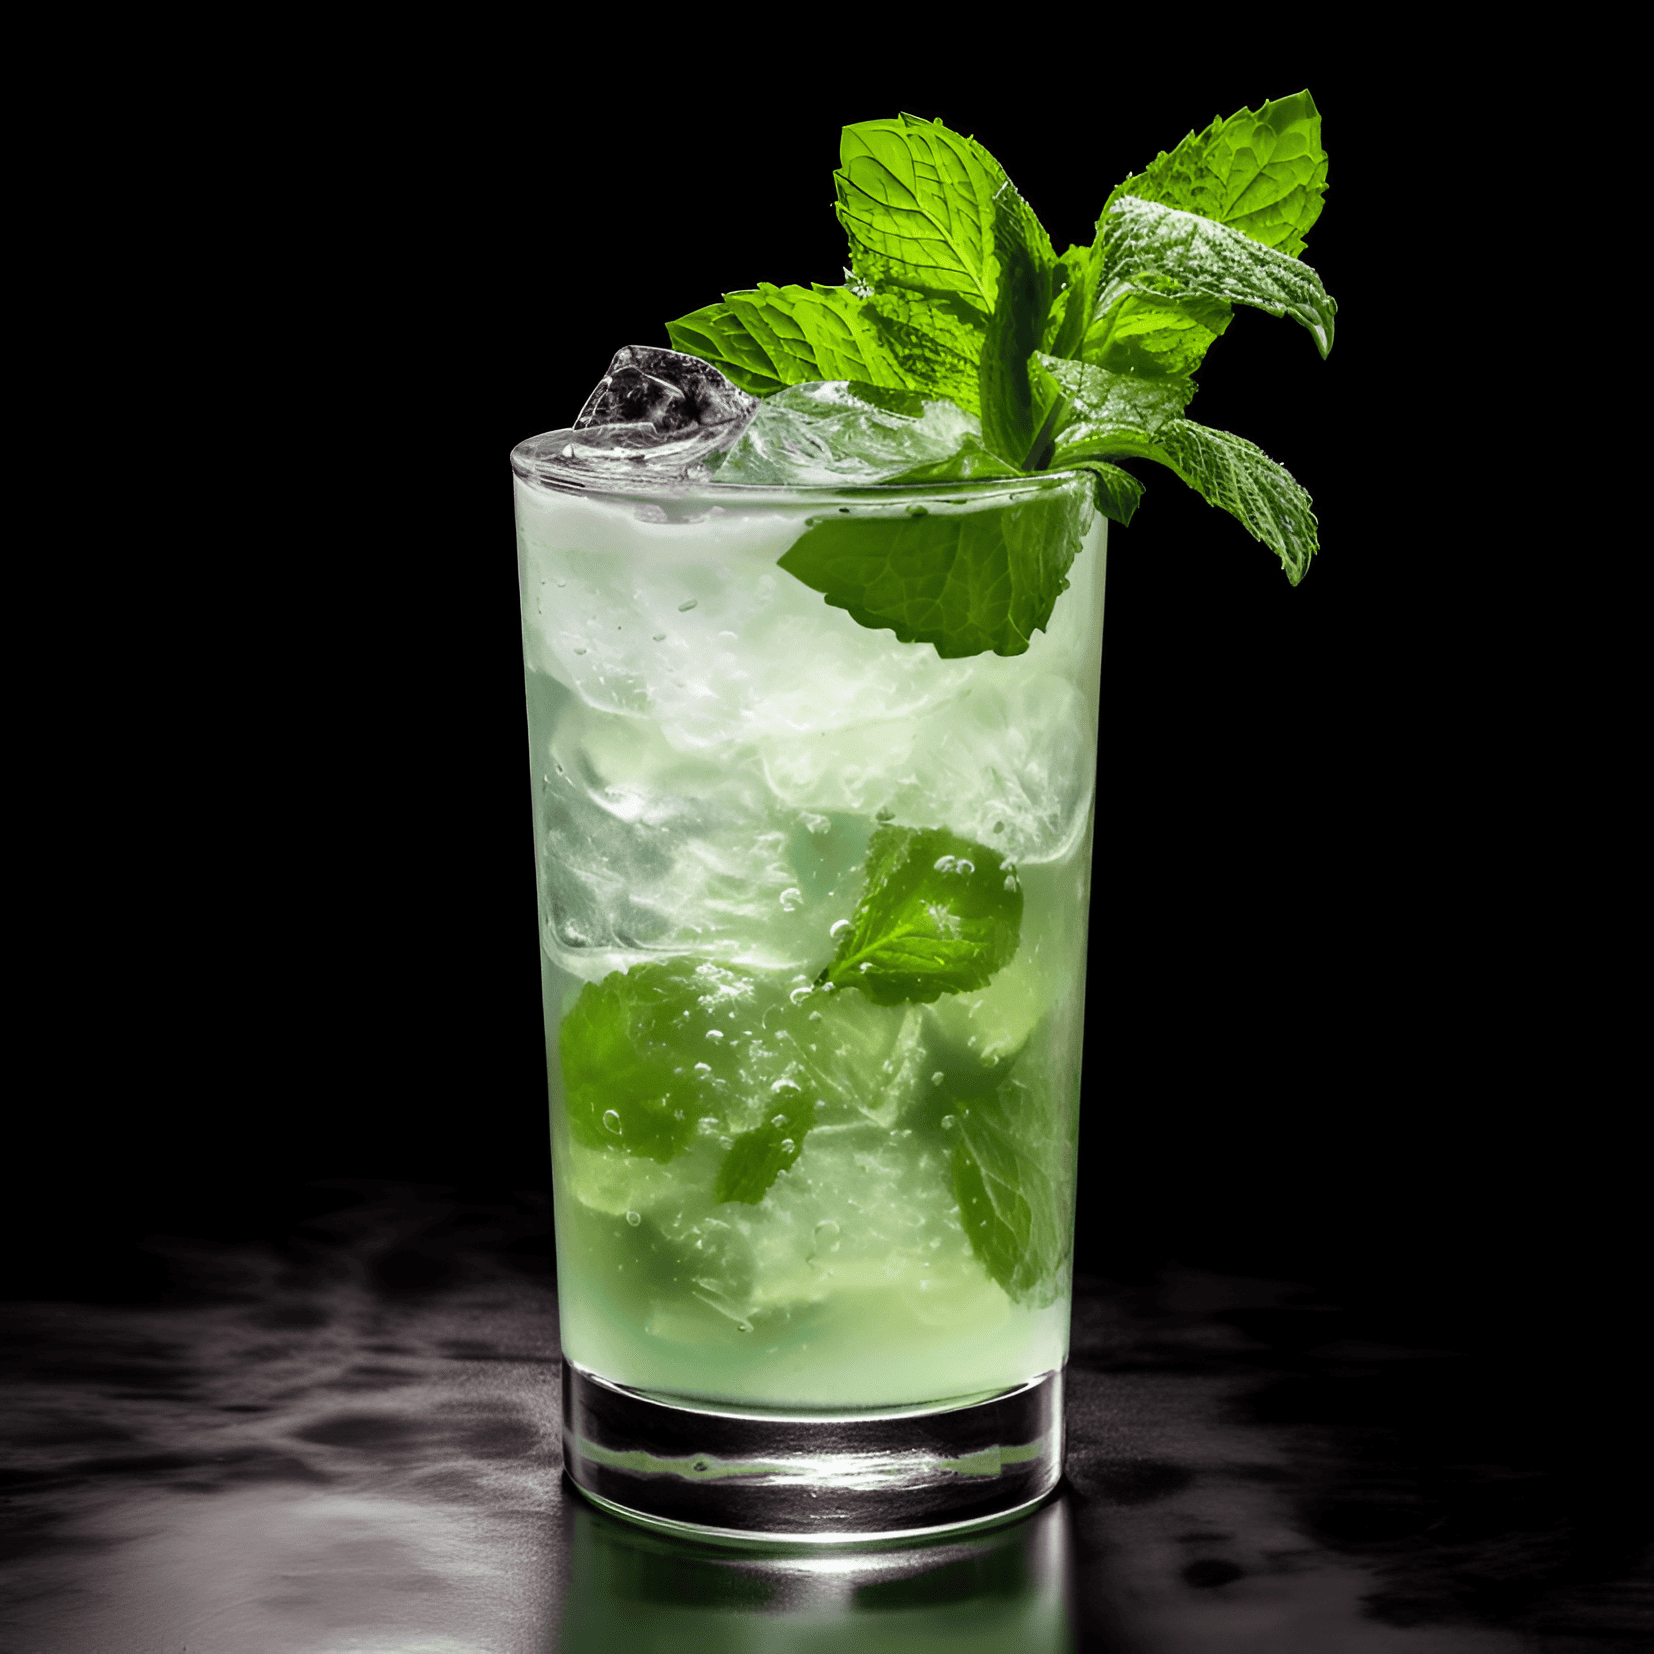 Kremlin Colonel Cocktail Recipe - The Kremlin Colonel is a refreshing, minty, and slightly sweet cocktail with a smooth vodka base. The taste is well-balanced, with the coolness of the mint and the sweetness of the sugar complementing the strong, clean flavor of the vodka.